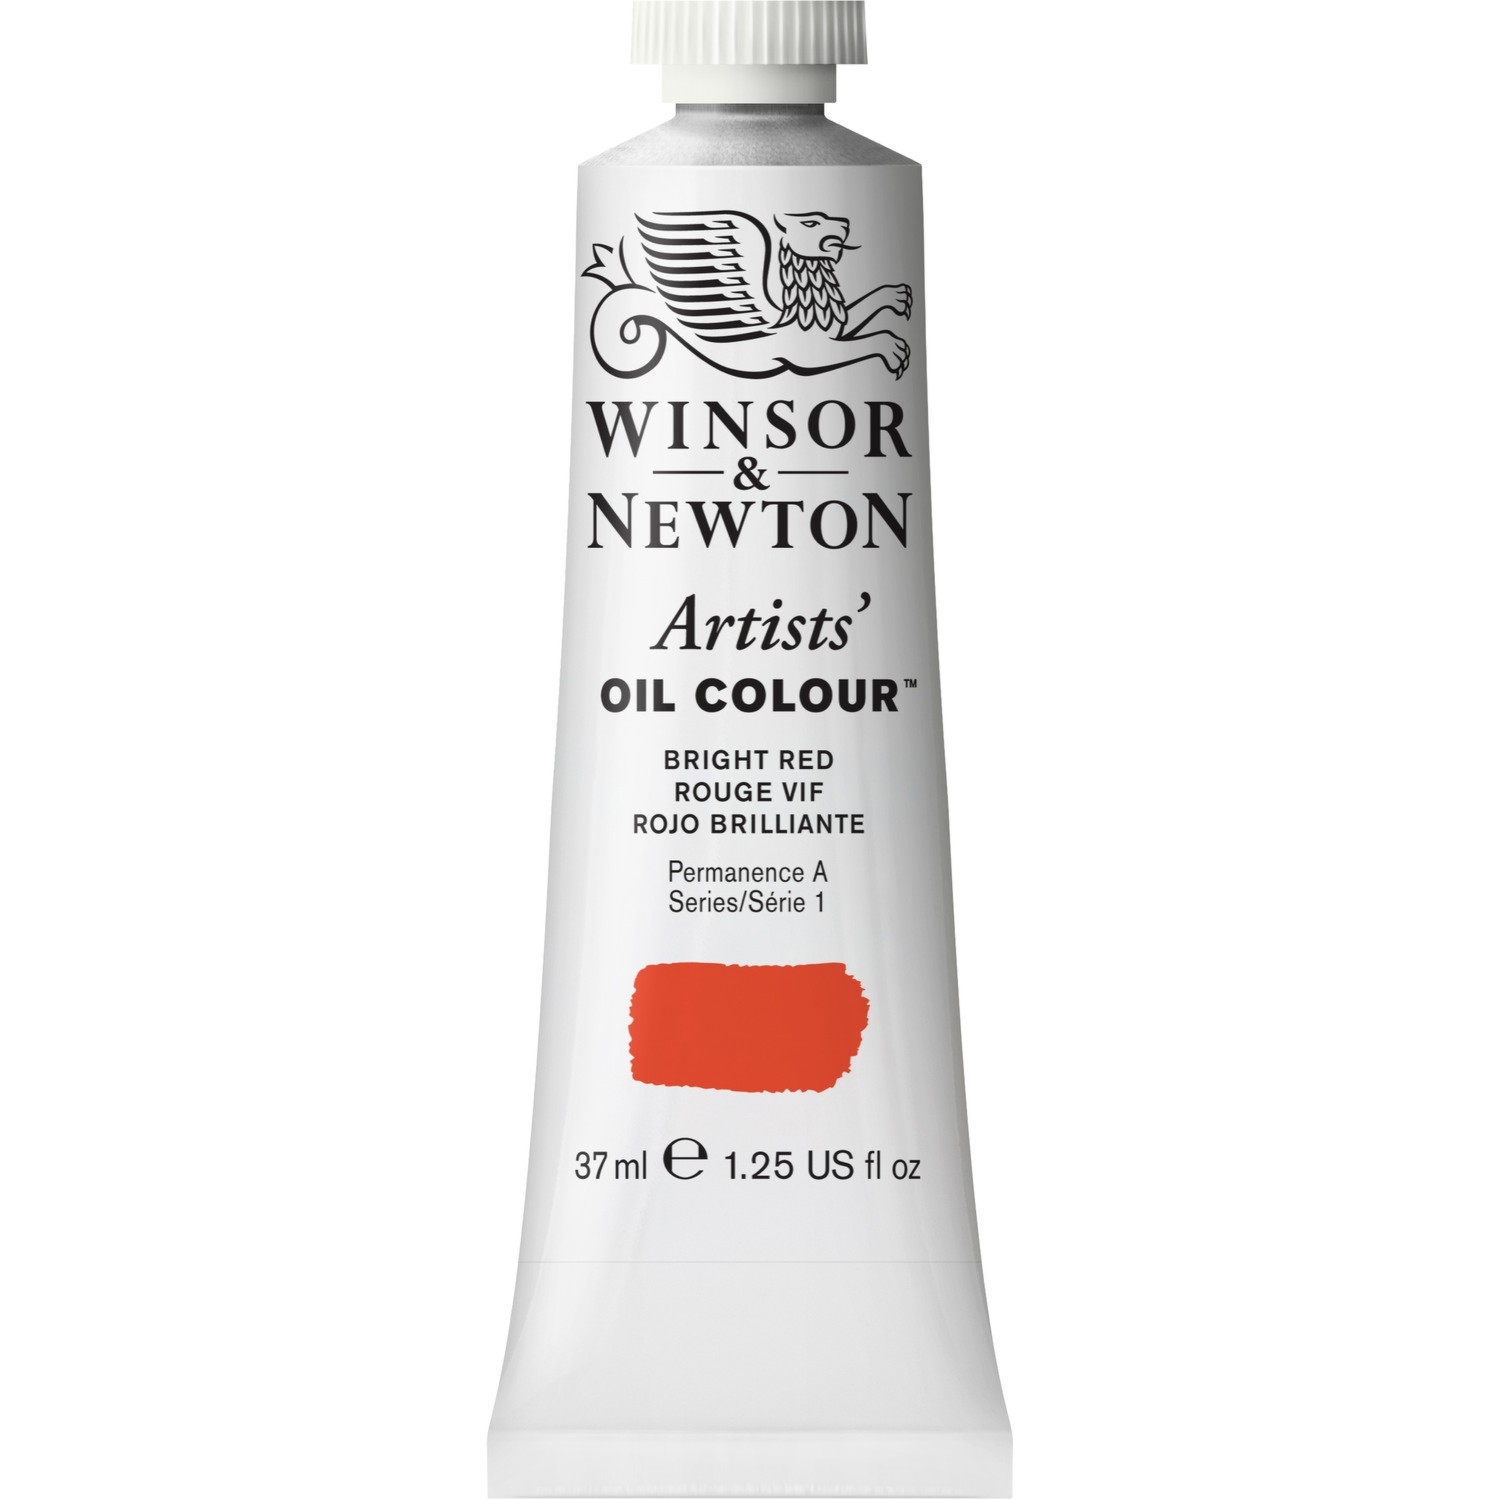 Winsor and Newton 37ml Artists' Oil Colours - Bright Red Image 1